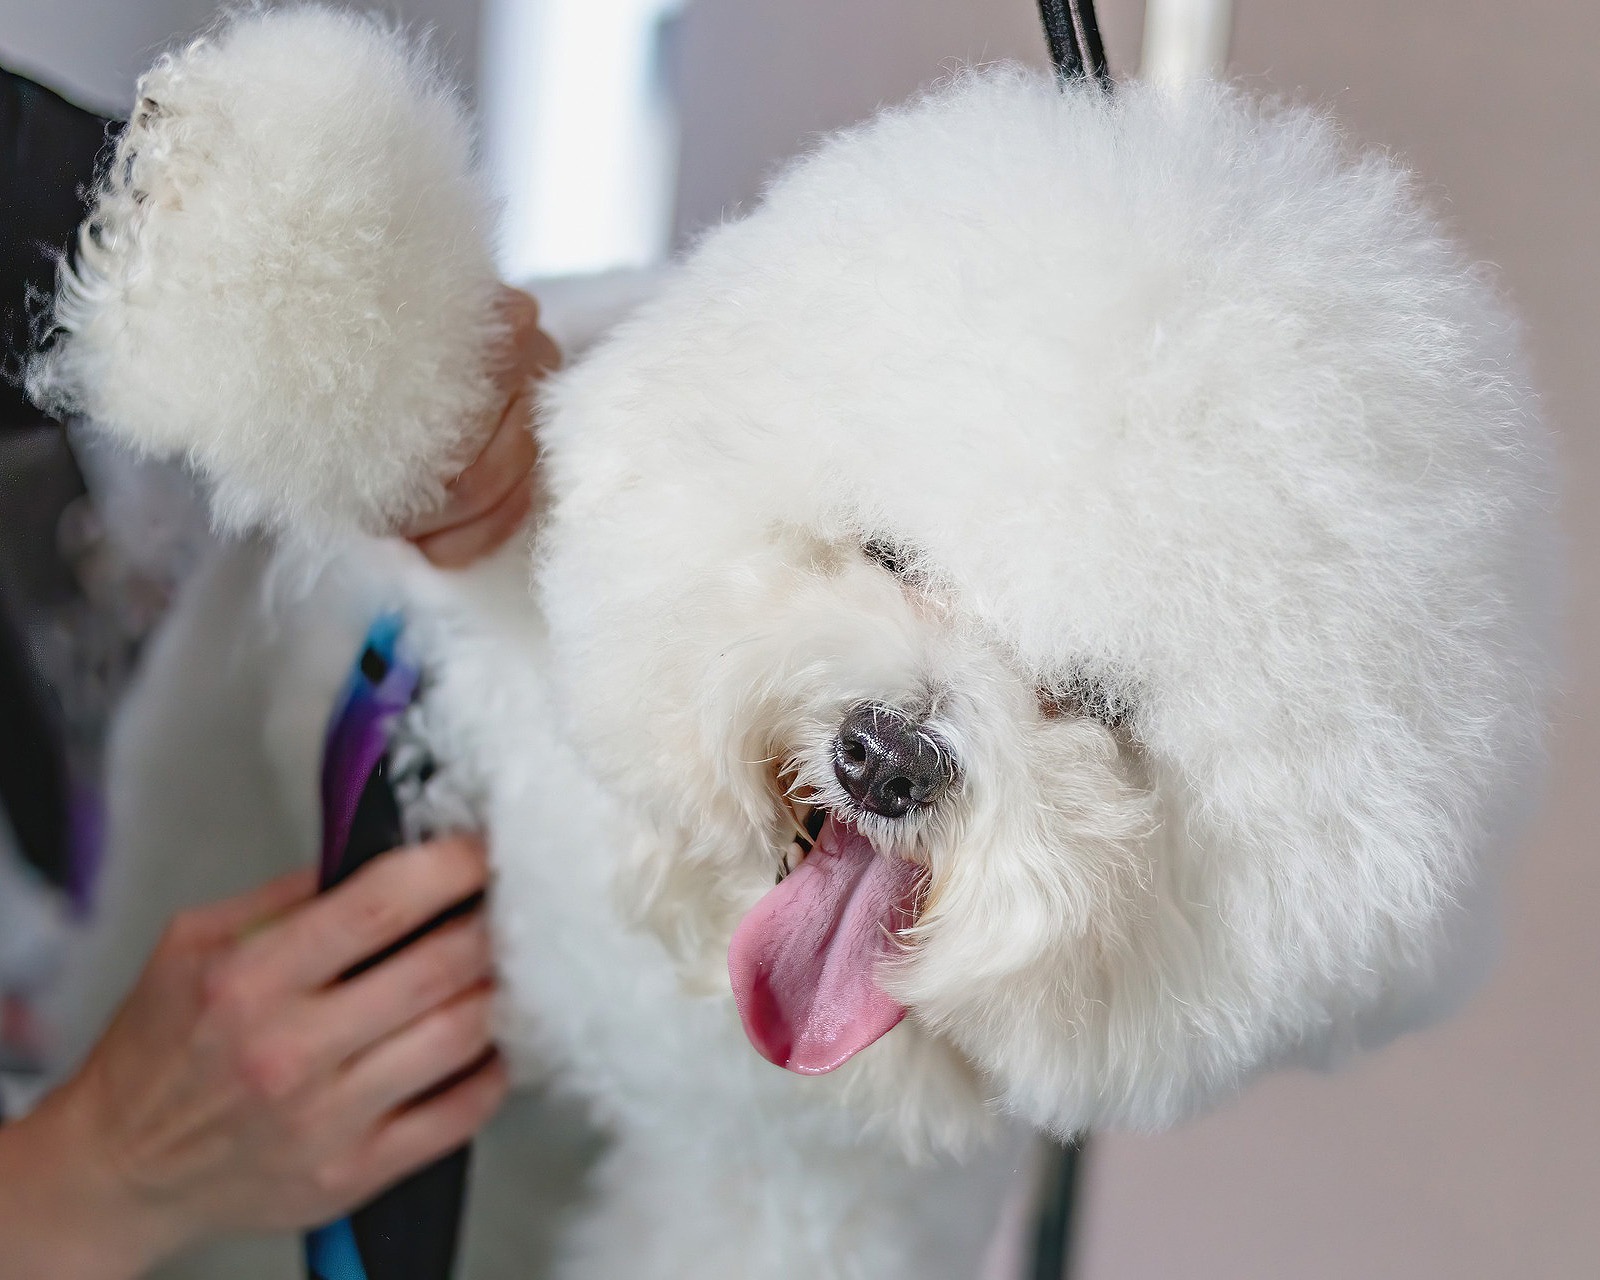 A fluffy Bichon Frisé white dog getting groomed on the table 